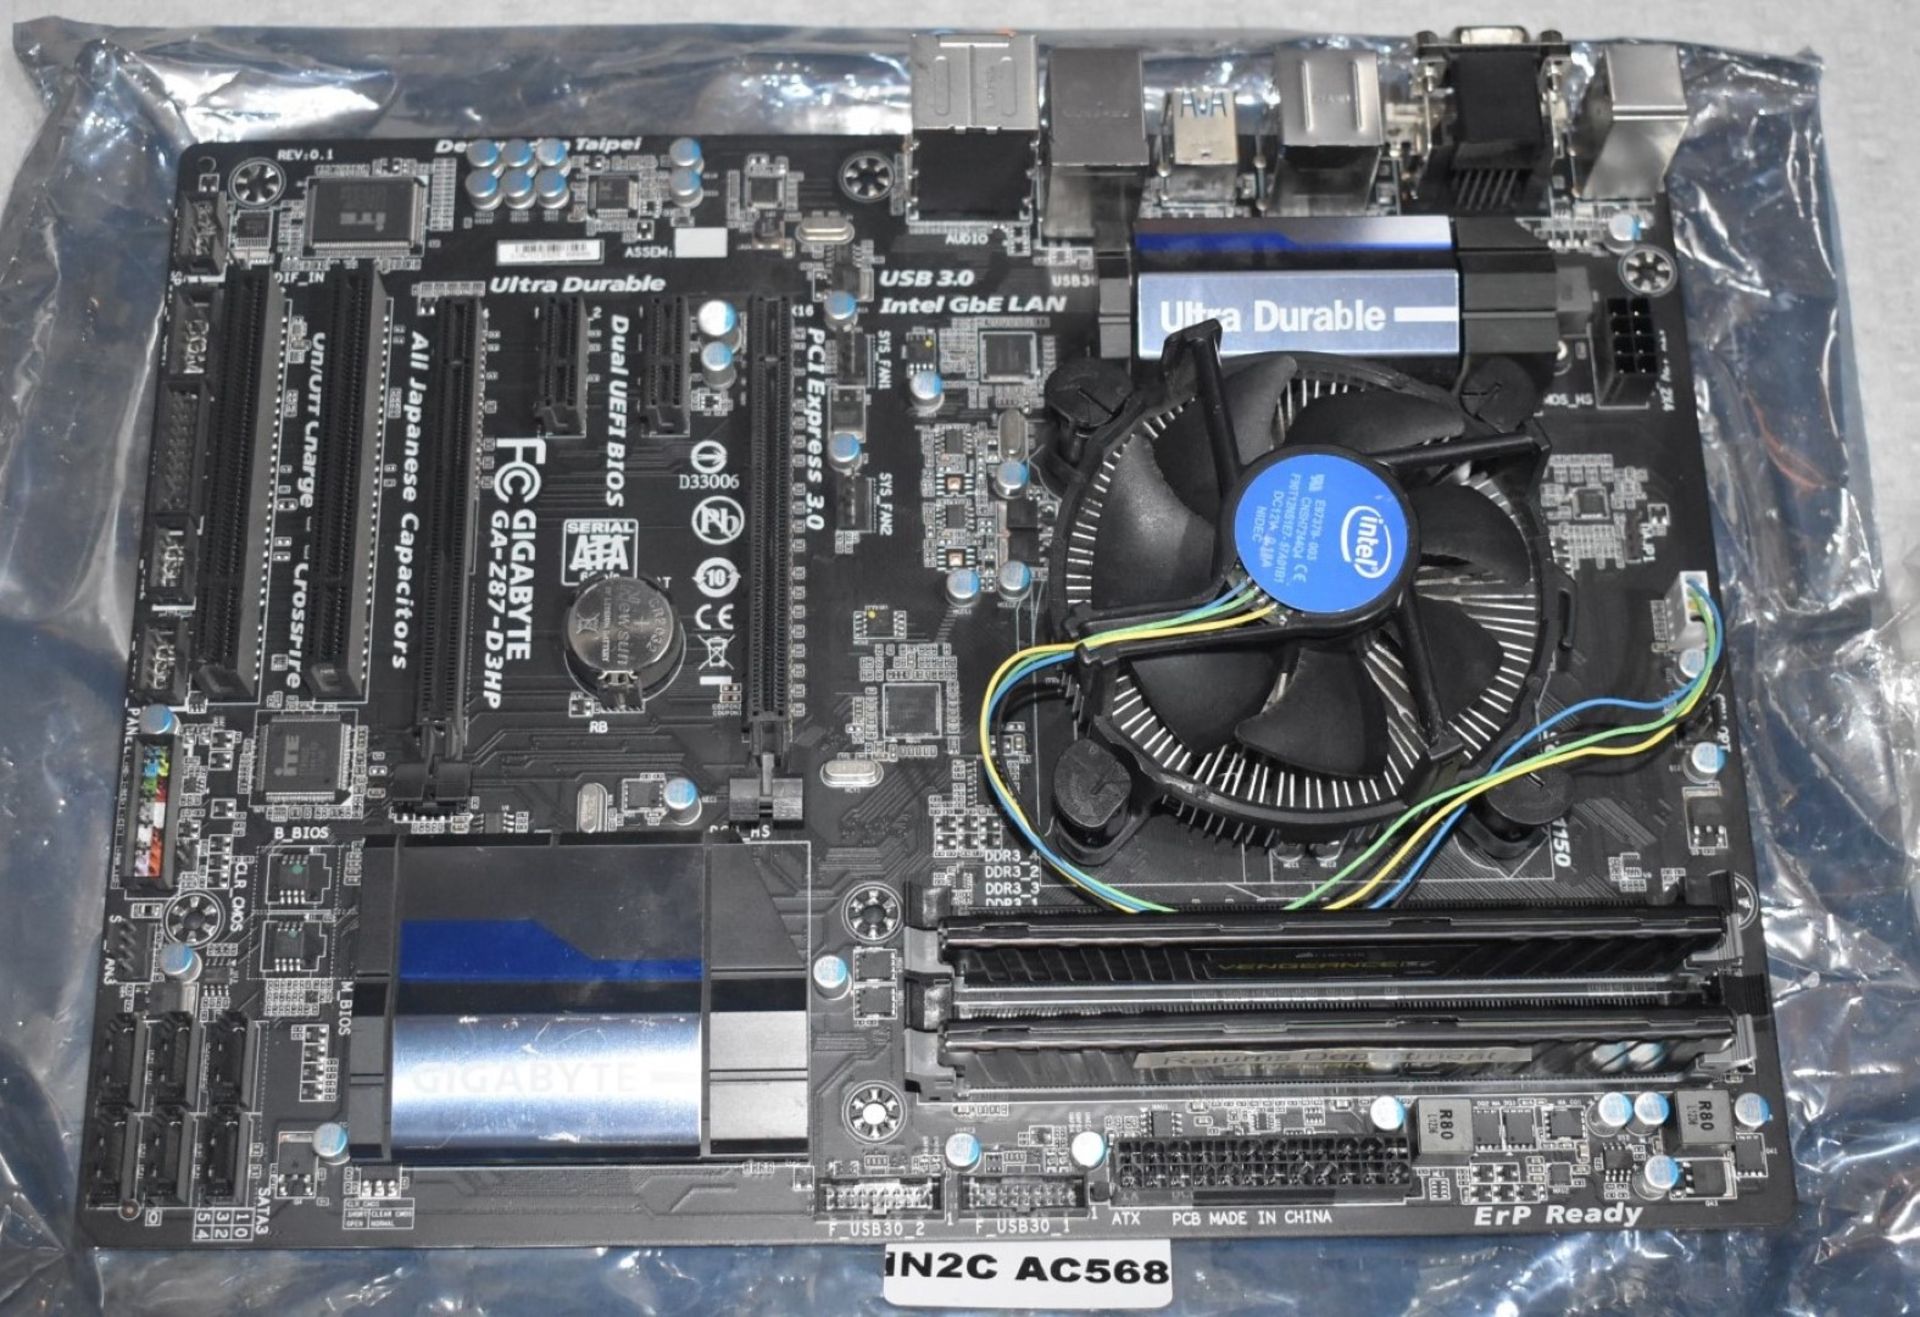 1 x Gigabyte GA-Z87-D3HP Motherboard With an Intel i5-4670k Processor and 4gb Ram